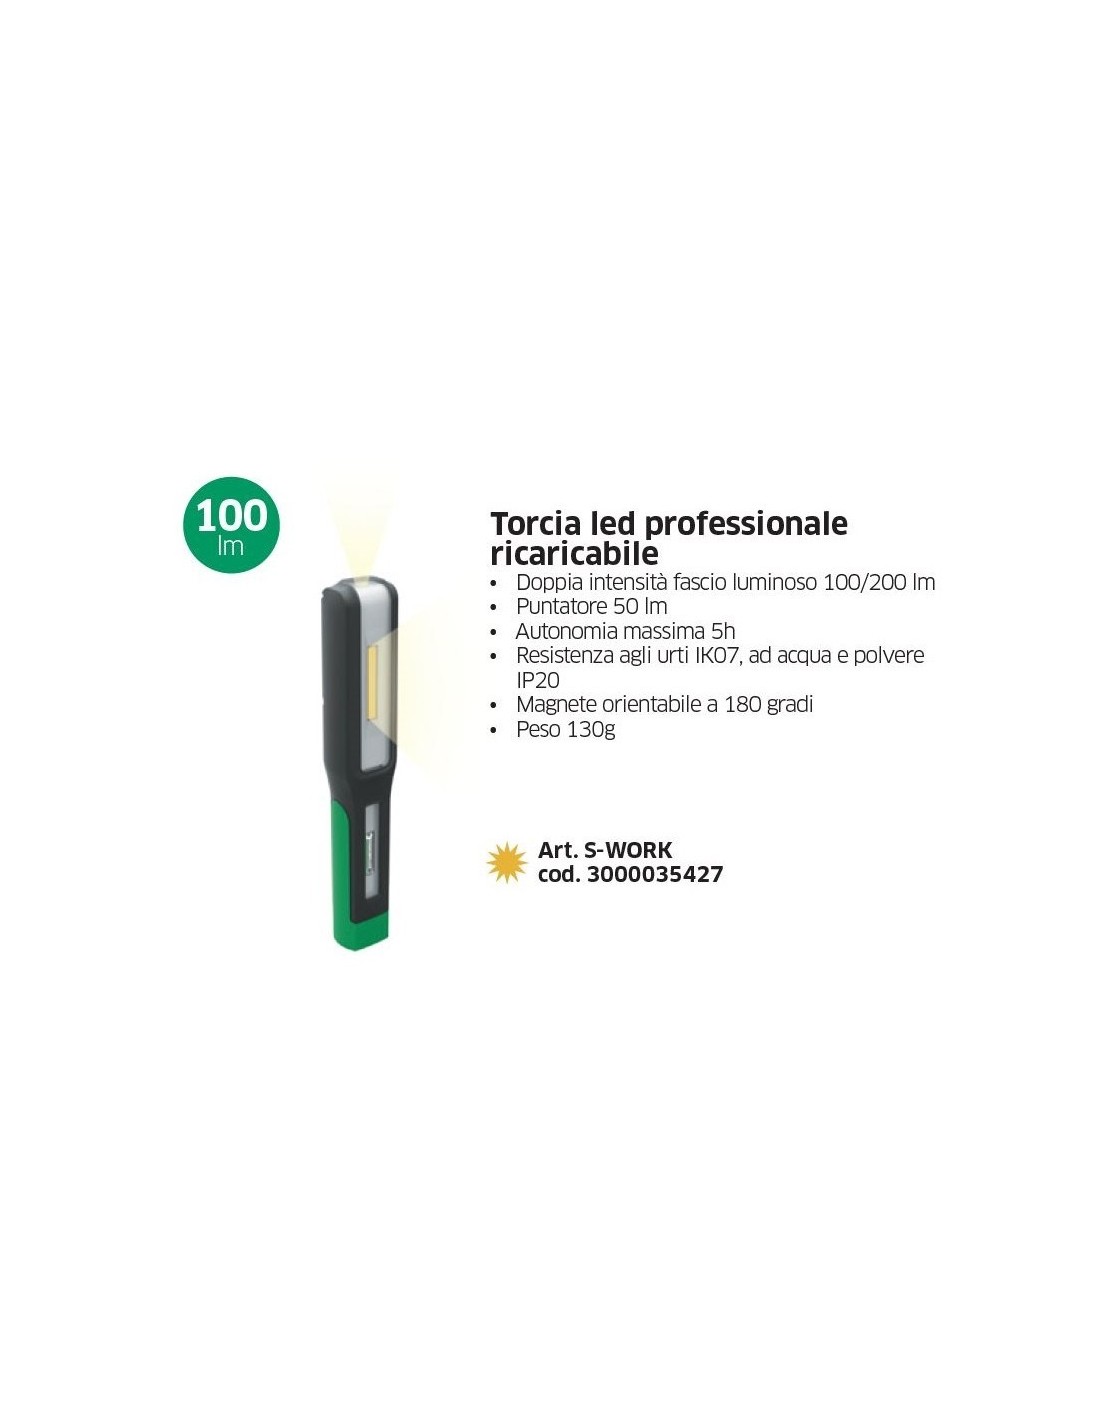 stahlwille-s-work-torcia-led-professionale-ricaricabile